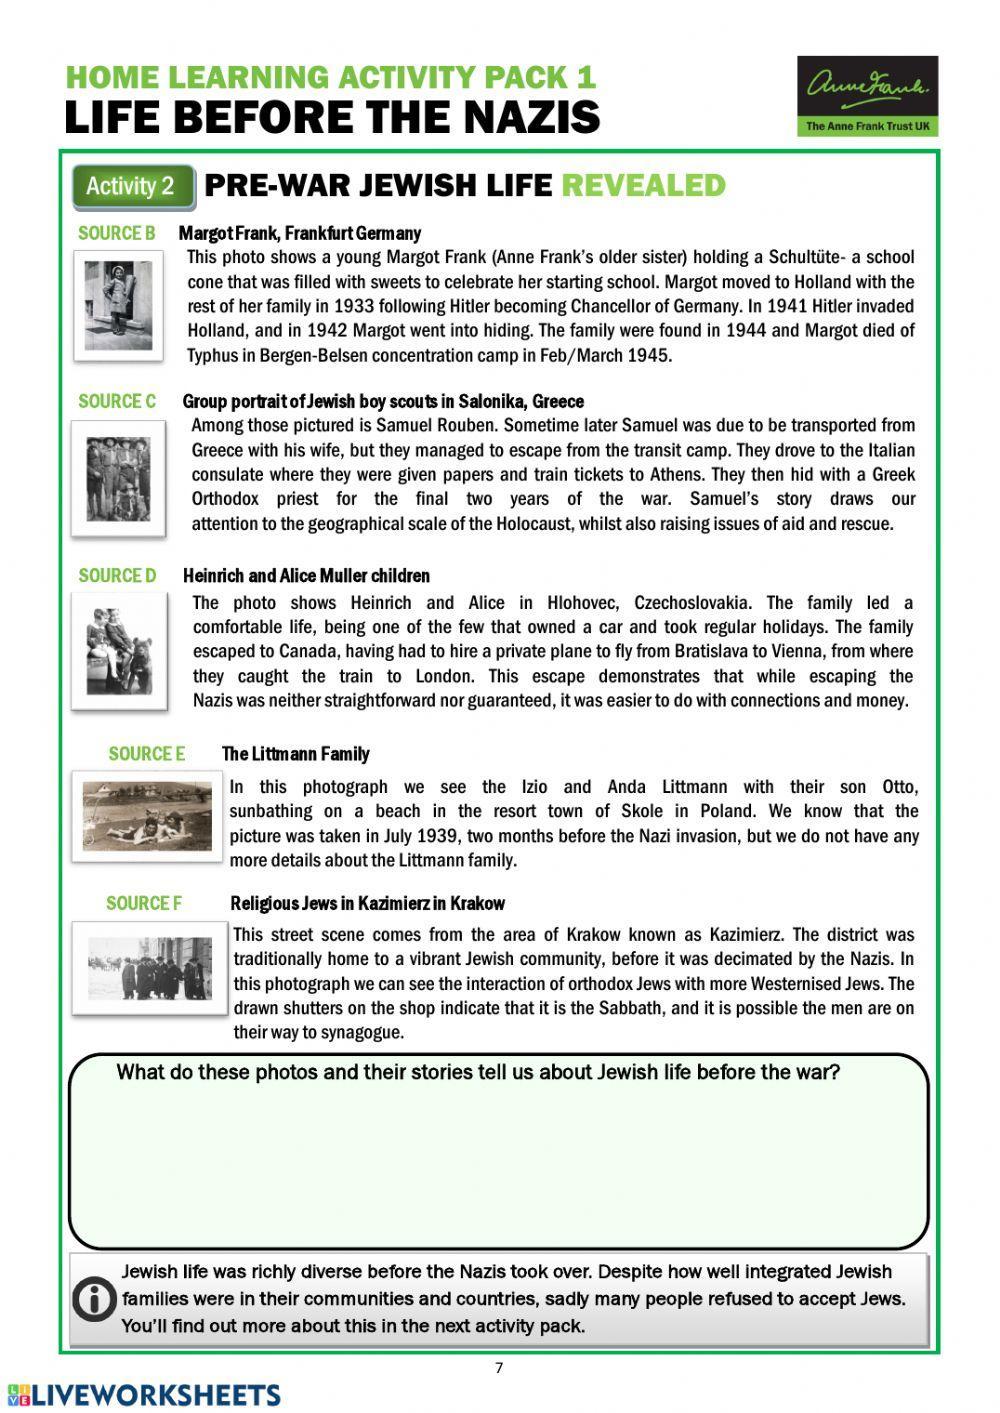 Home Learning Activity Pack 1 - LIFE BEFORE THE NAZIS